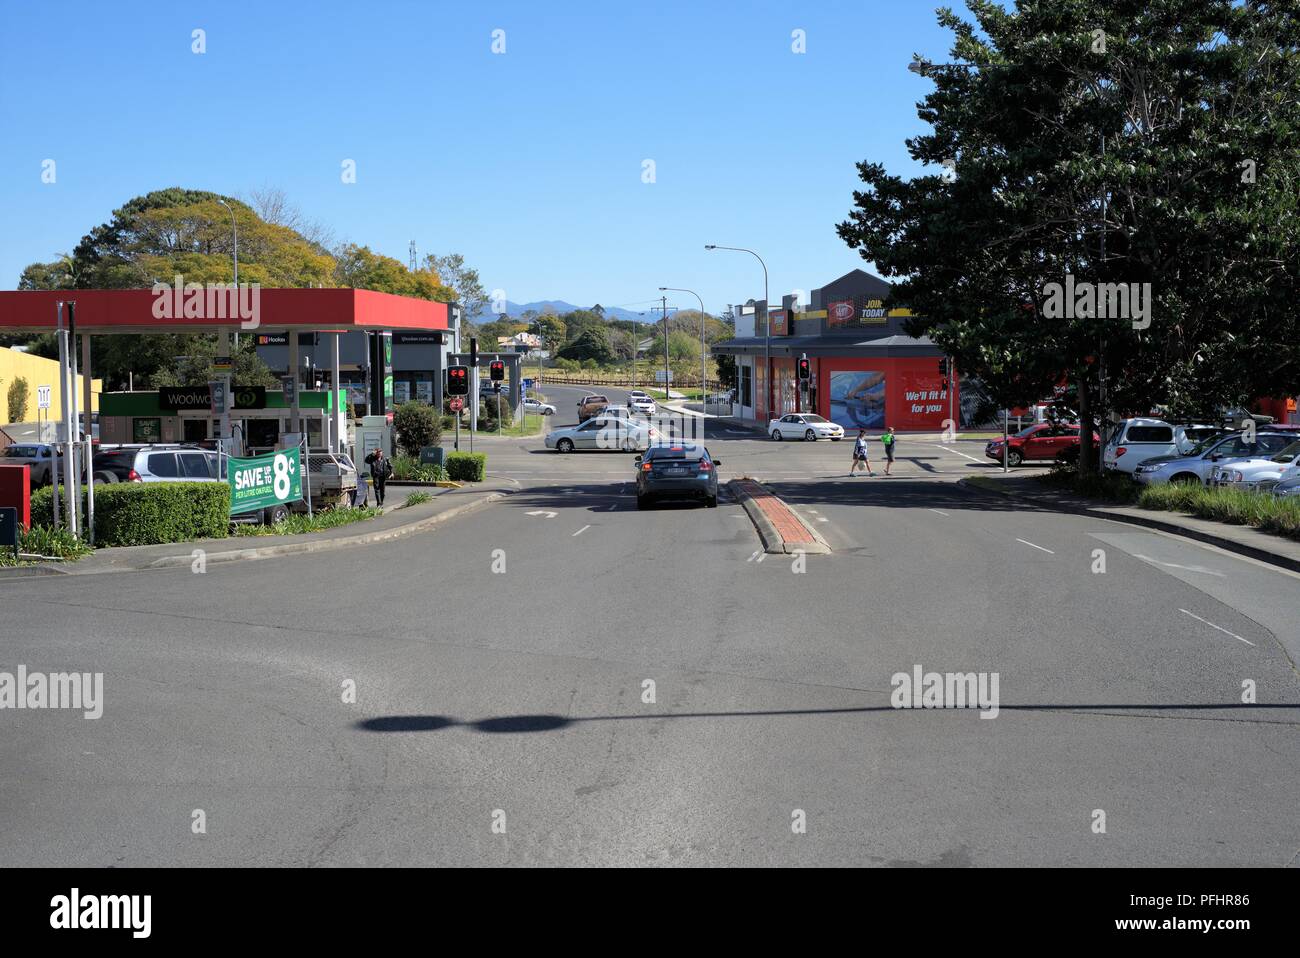 Moving traffic on road in Australian town of Kempsey in New South Wales on 13 August 2018. Stock Photo